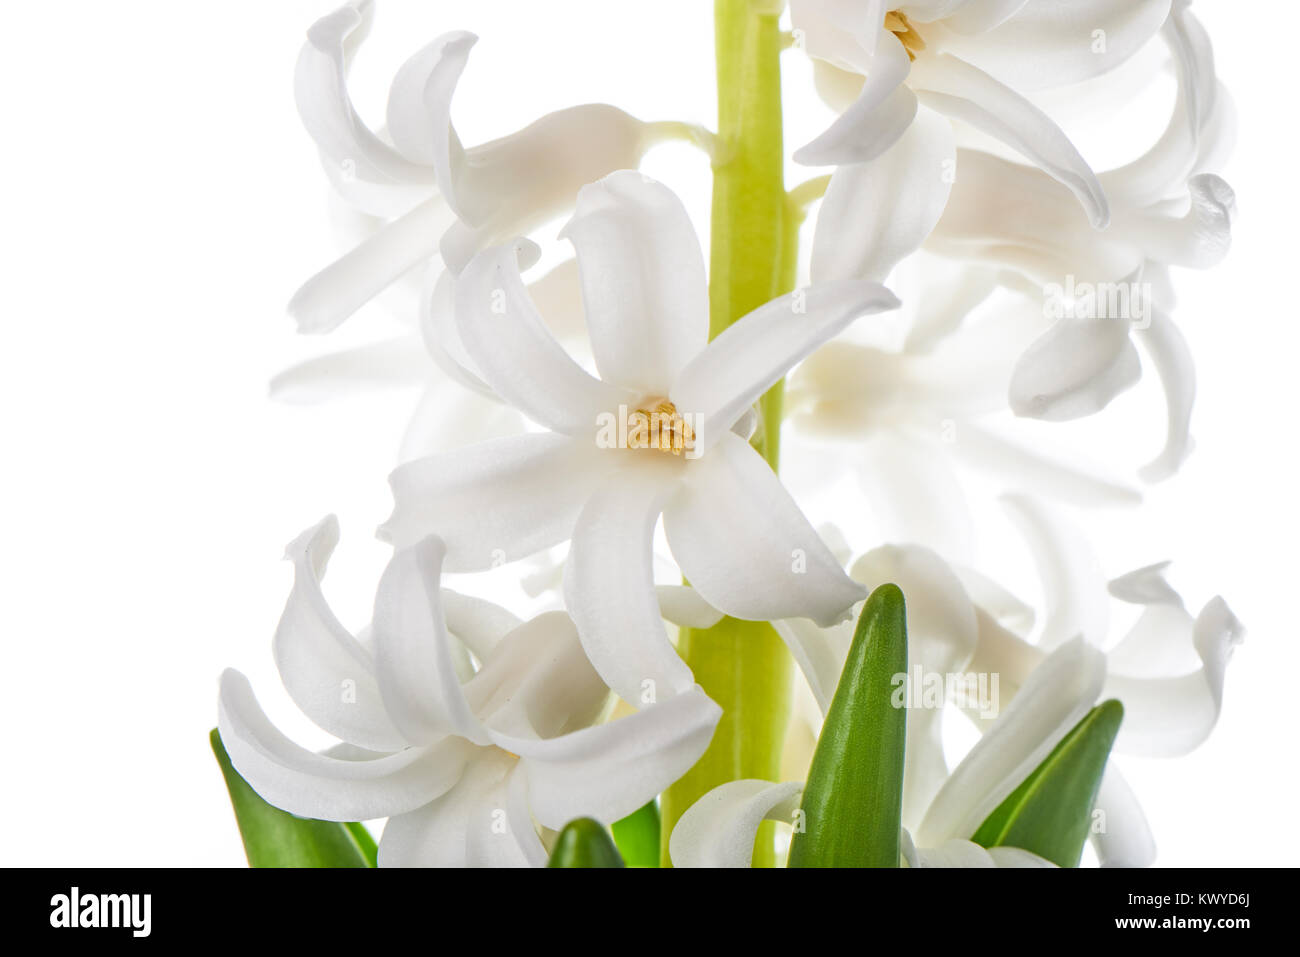 hyacinth flowers isolated on white. Hyacinthus is a small genus of flowering plants in the family Asparagaceae. Stock Photo